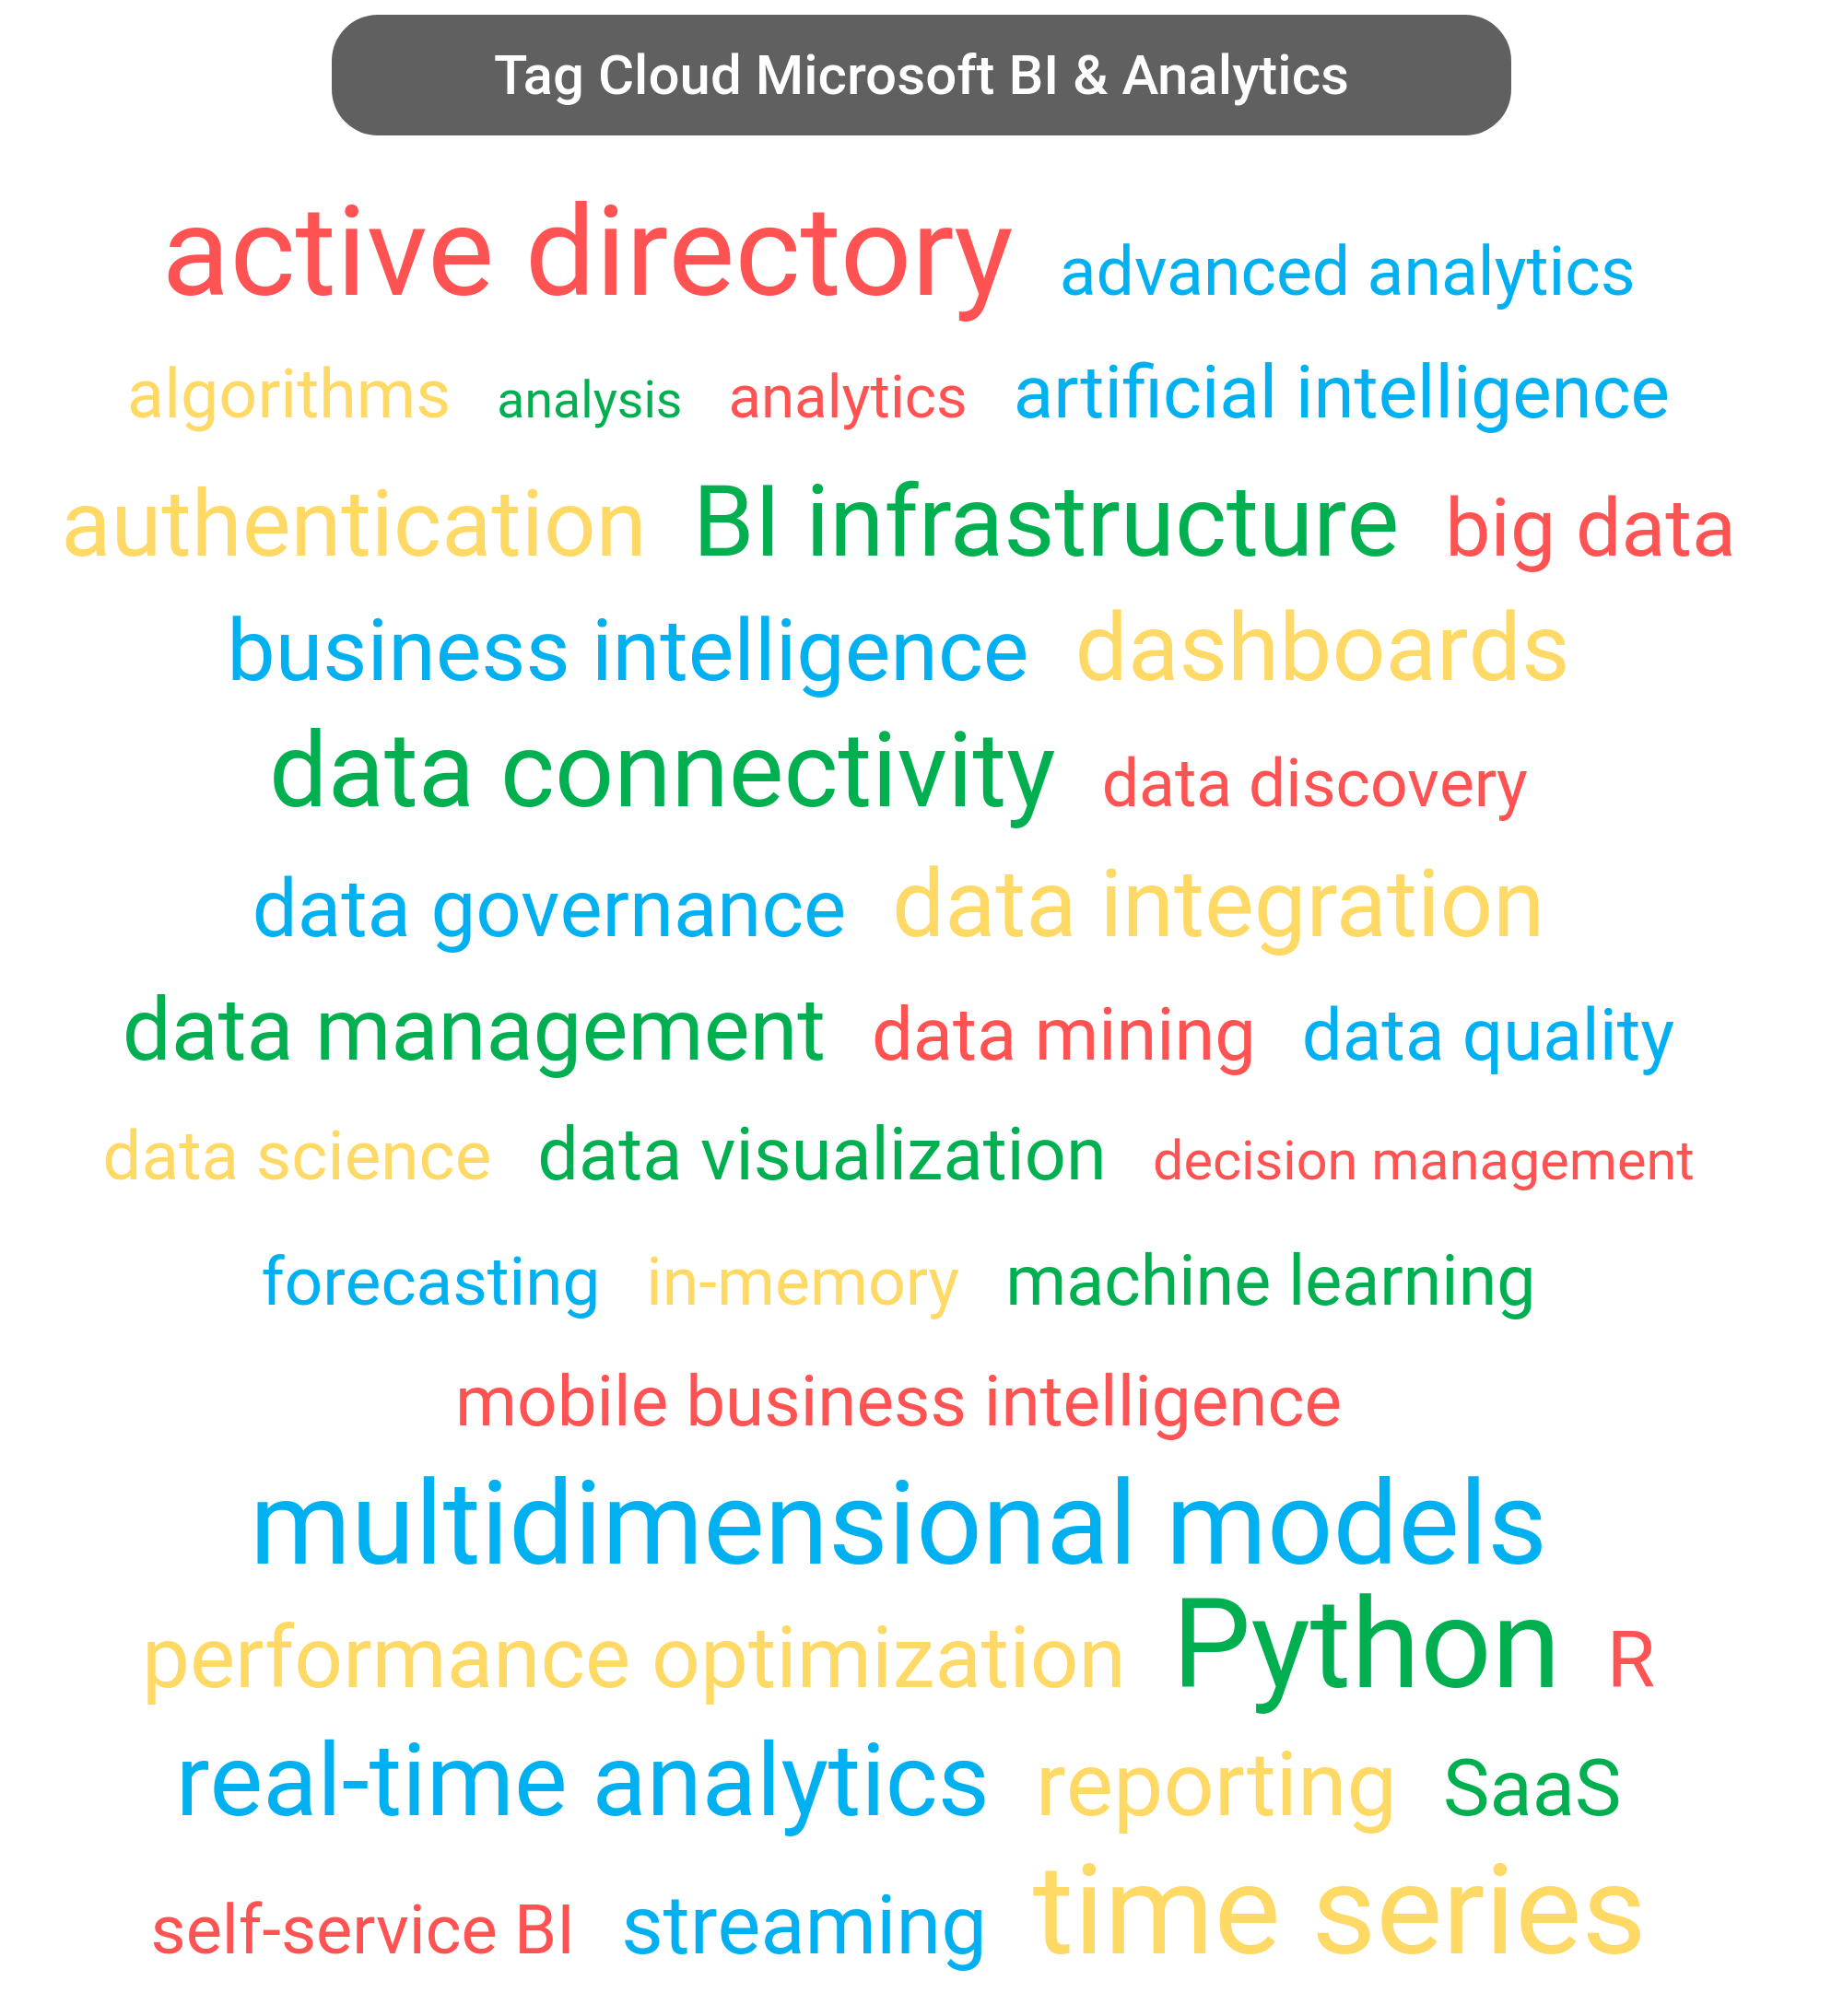 Tag cloud of the Microsoft Business Intelligence tools.